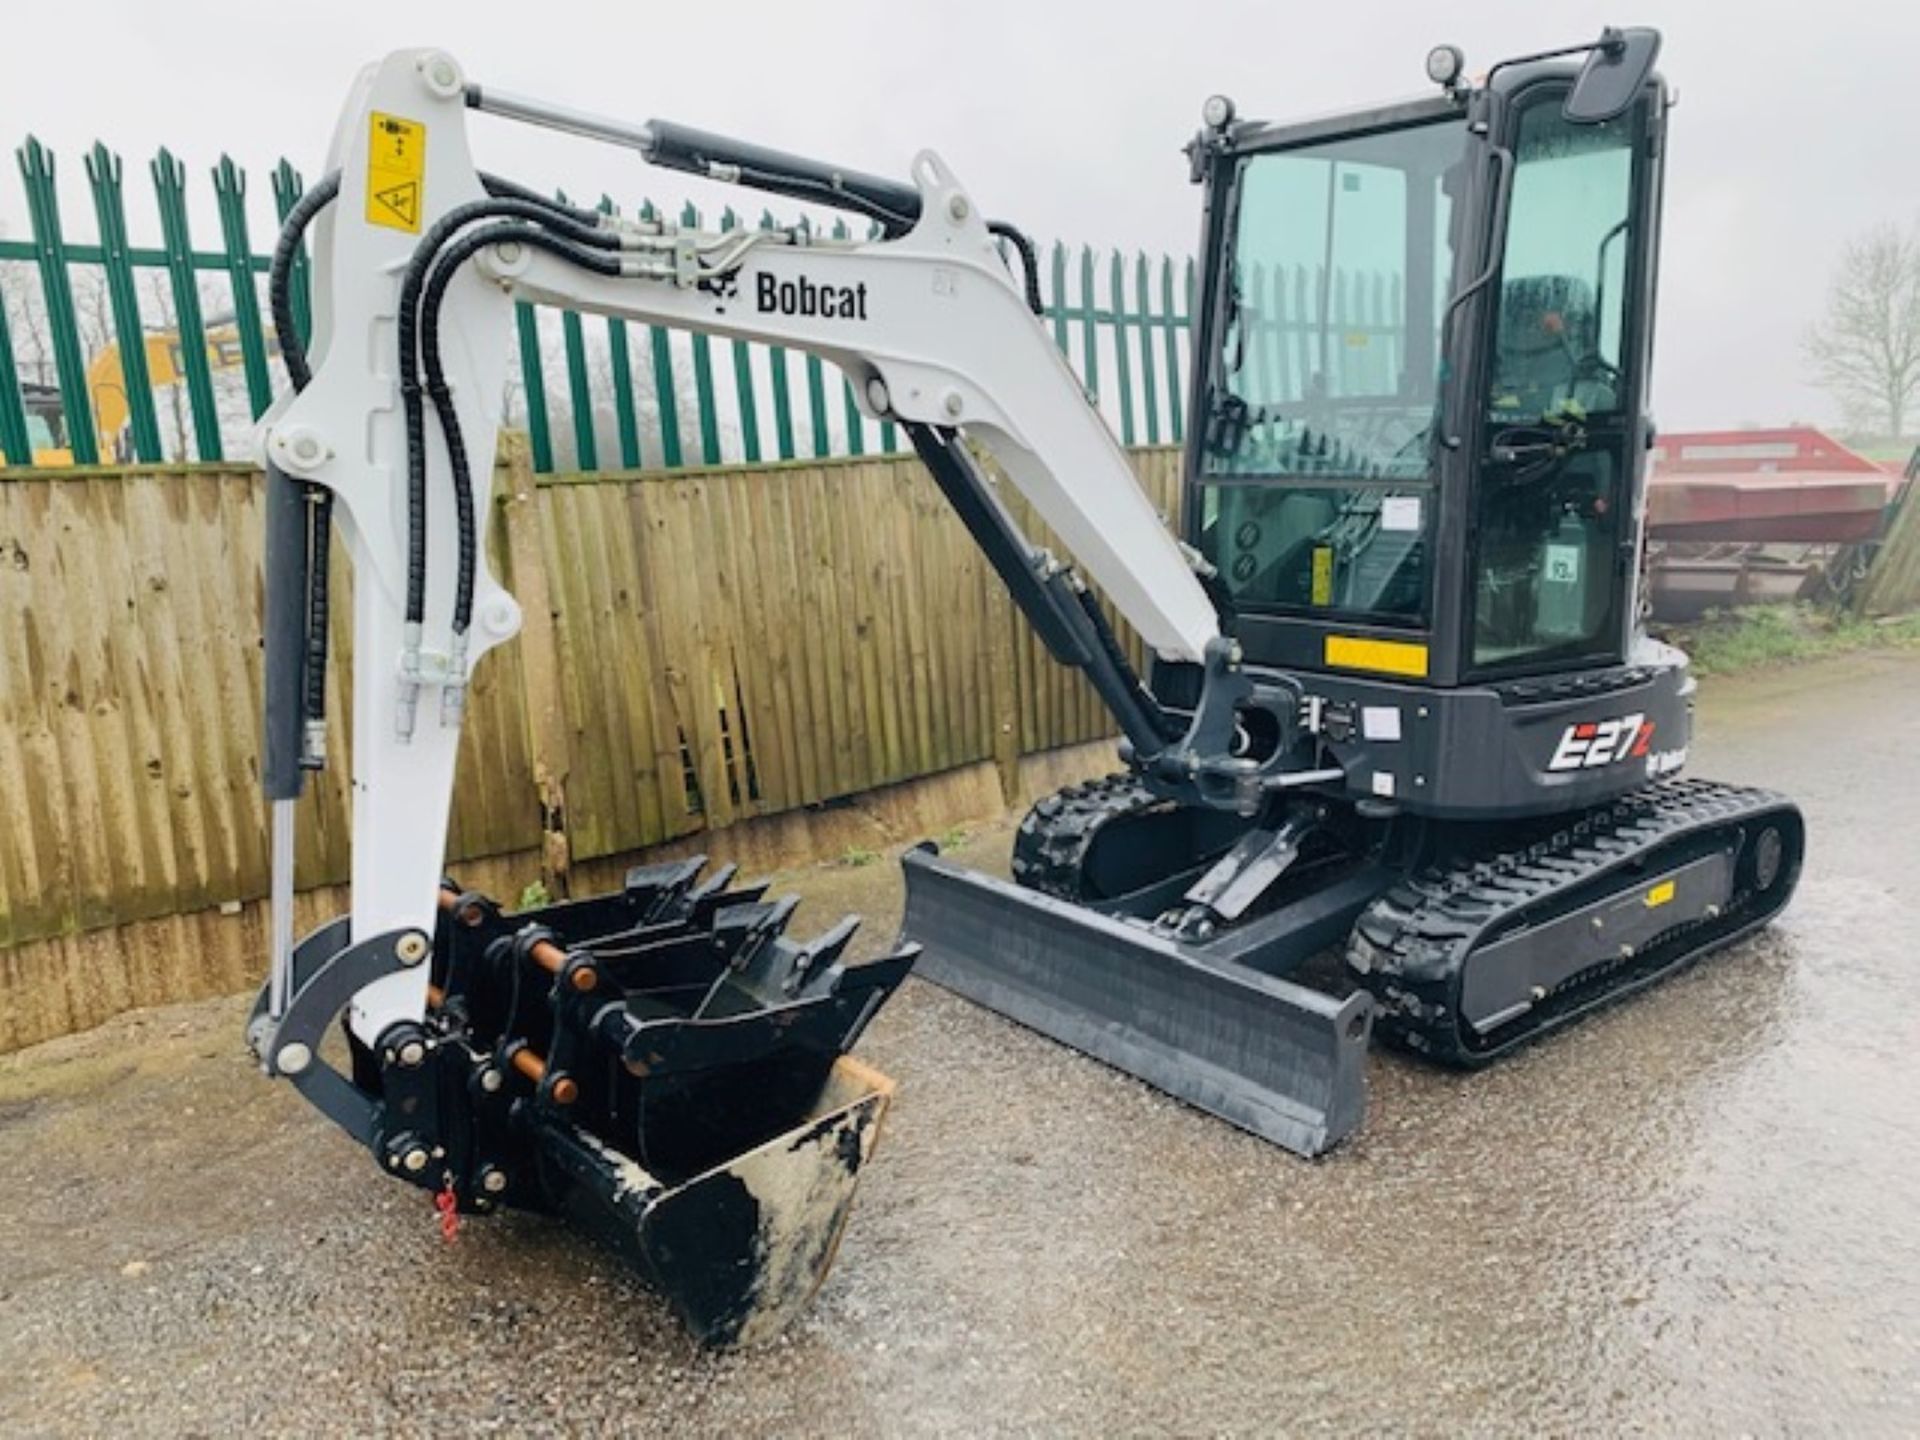 BOBCAT E27Z TRACKED RUBBER CRAWLER DIGGER / EXCAVATOR, YEAR 2019, 55 HOURS, QUICK HITCH & 3 BUCKETS - Image 2 of 11